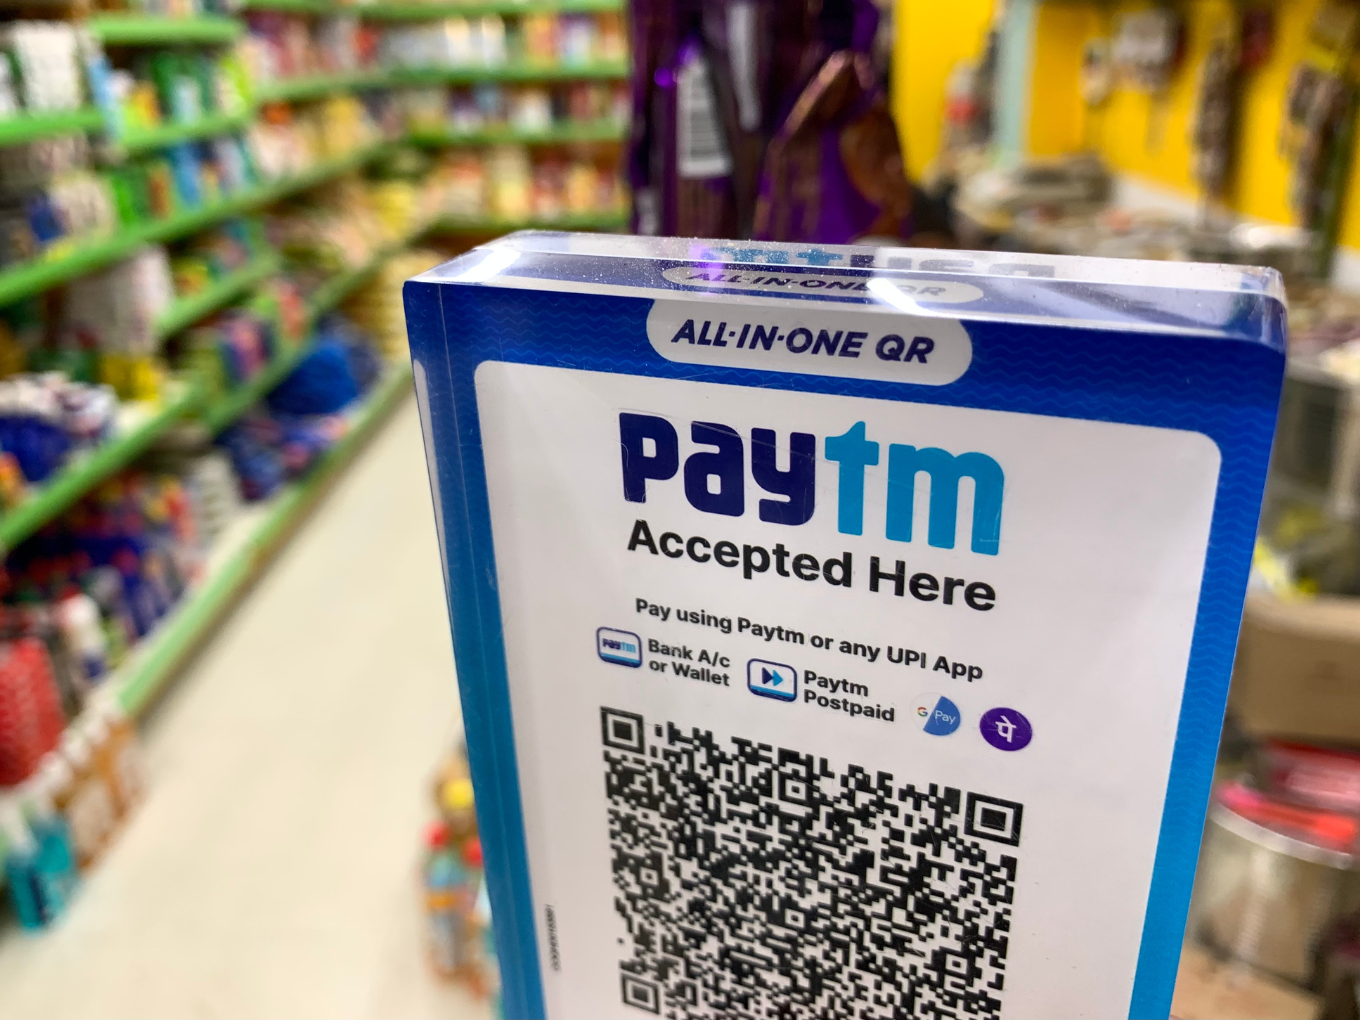 Paytm Payments Services Appoints SR Batliboi As New Auditor After PwC  India's Resignation